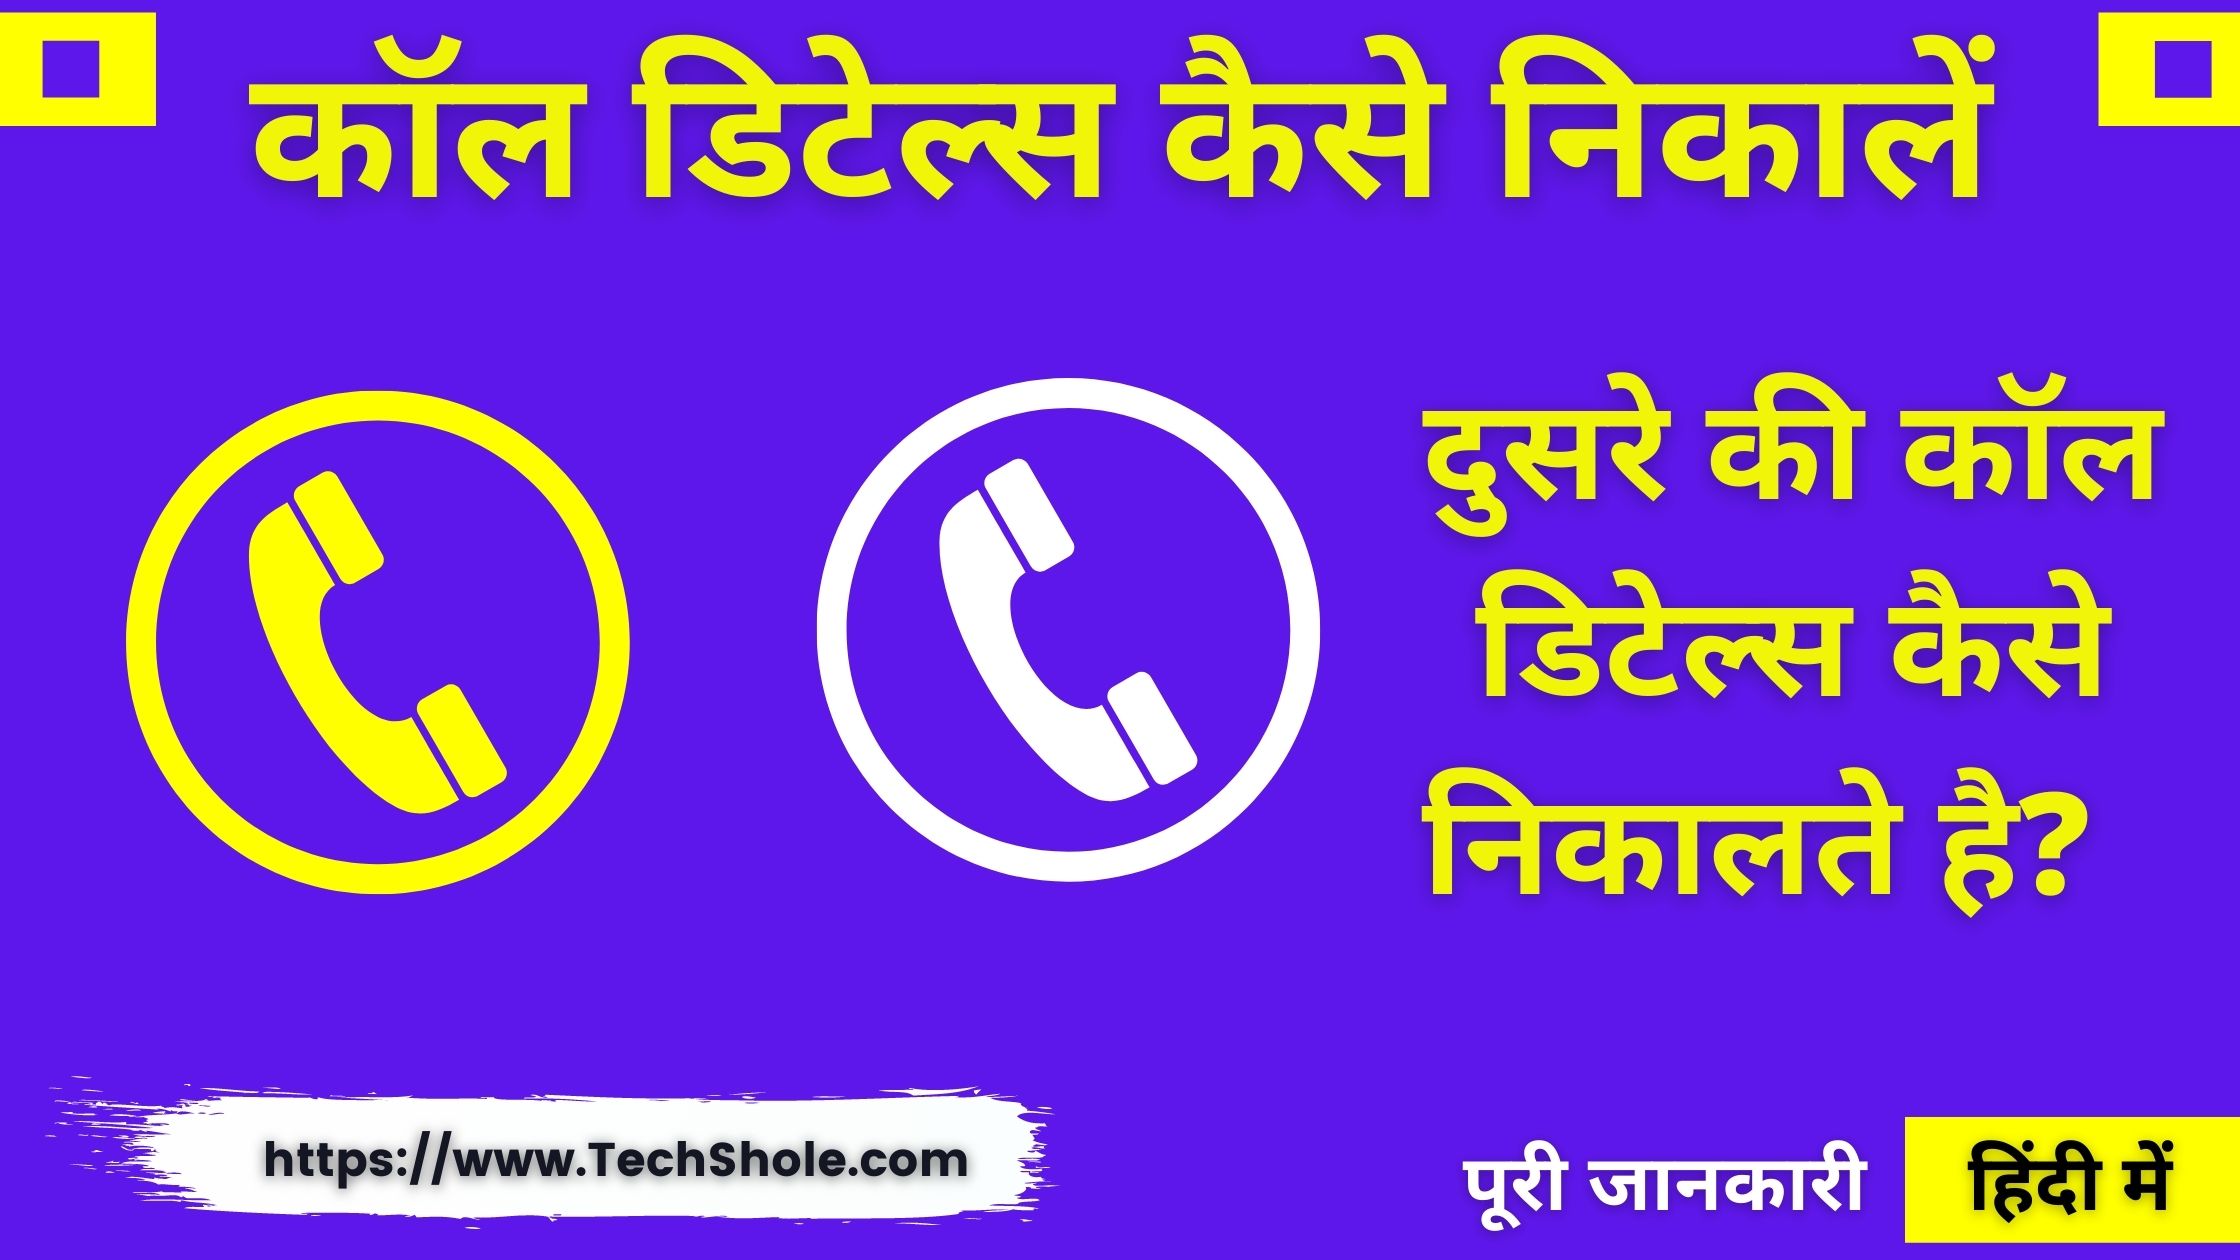 How to get call details of anyone - Call Details Kaise Nikale